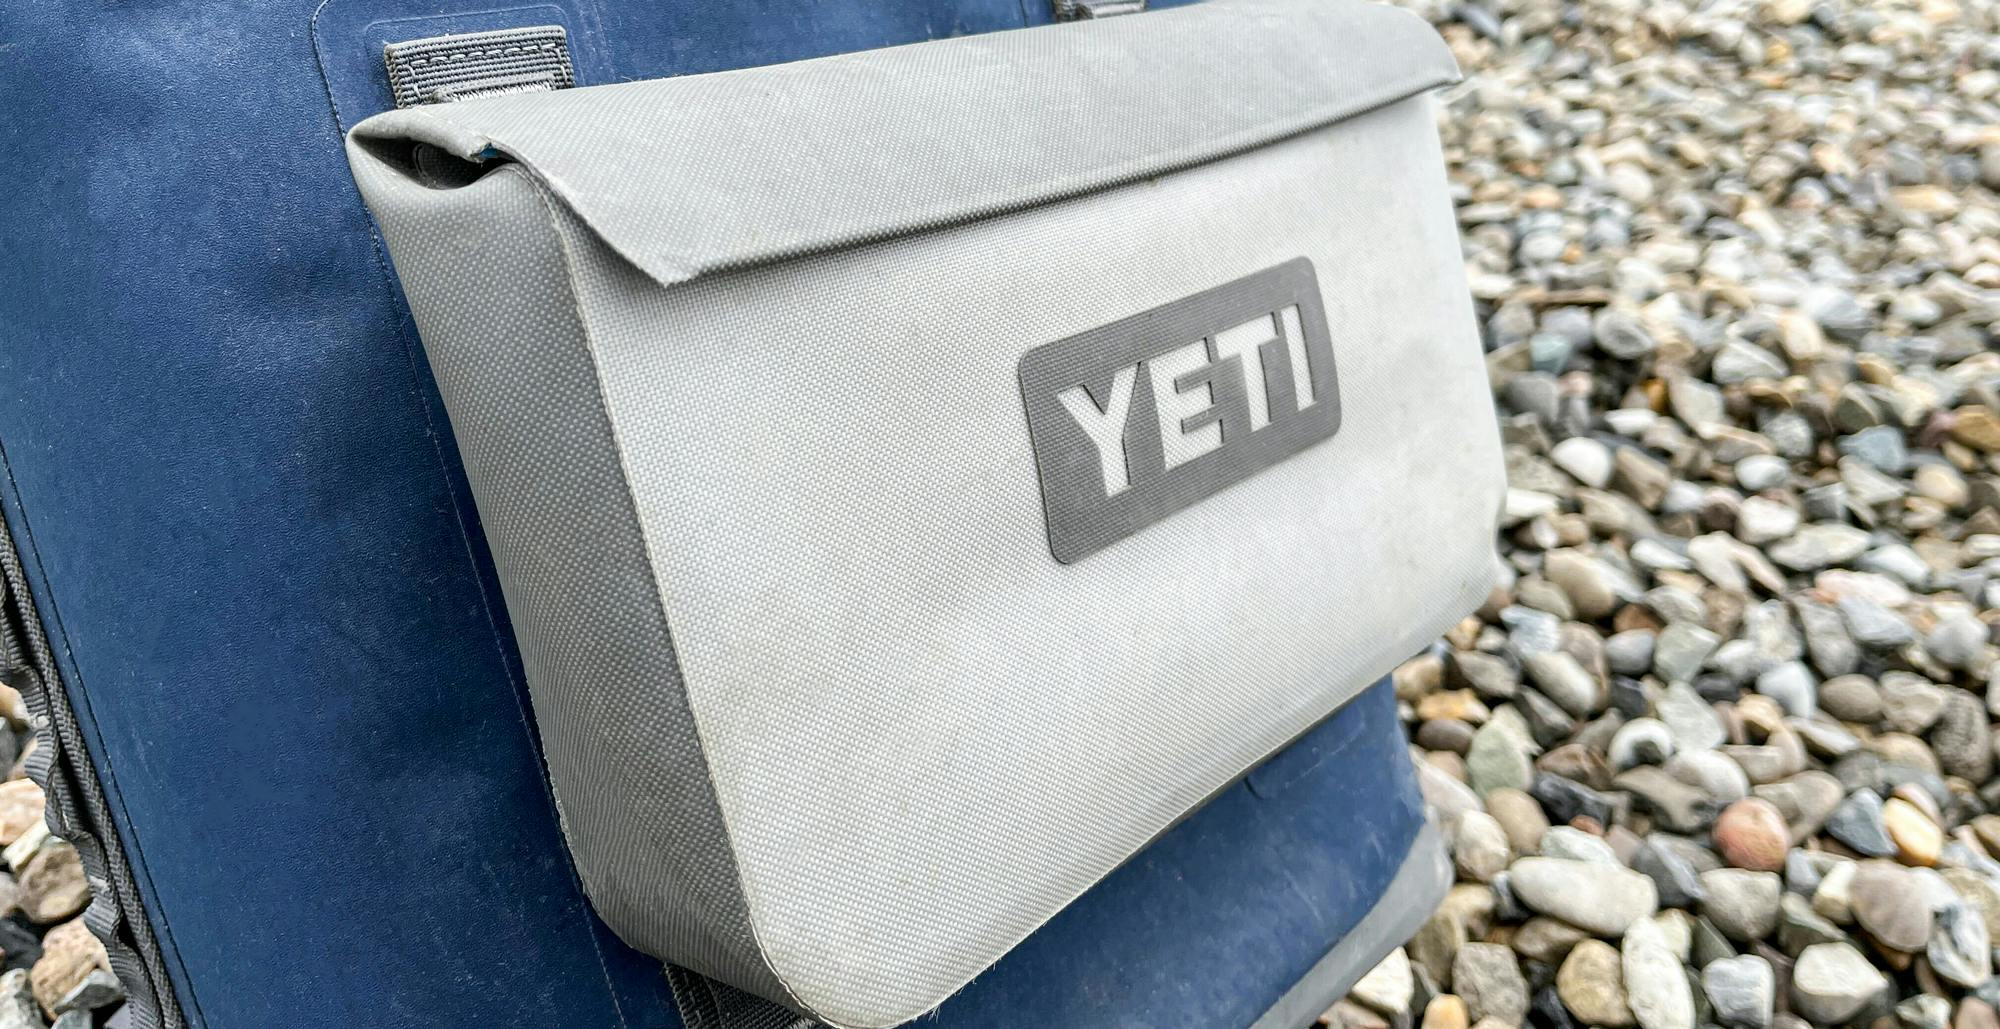 Alternative coolers to buy amid Yeti Hopper M20, M30 cooler recall